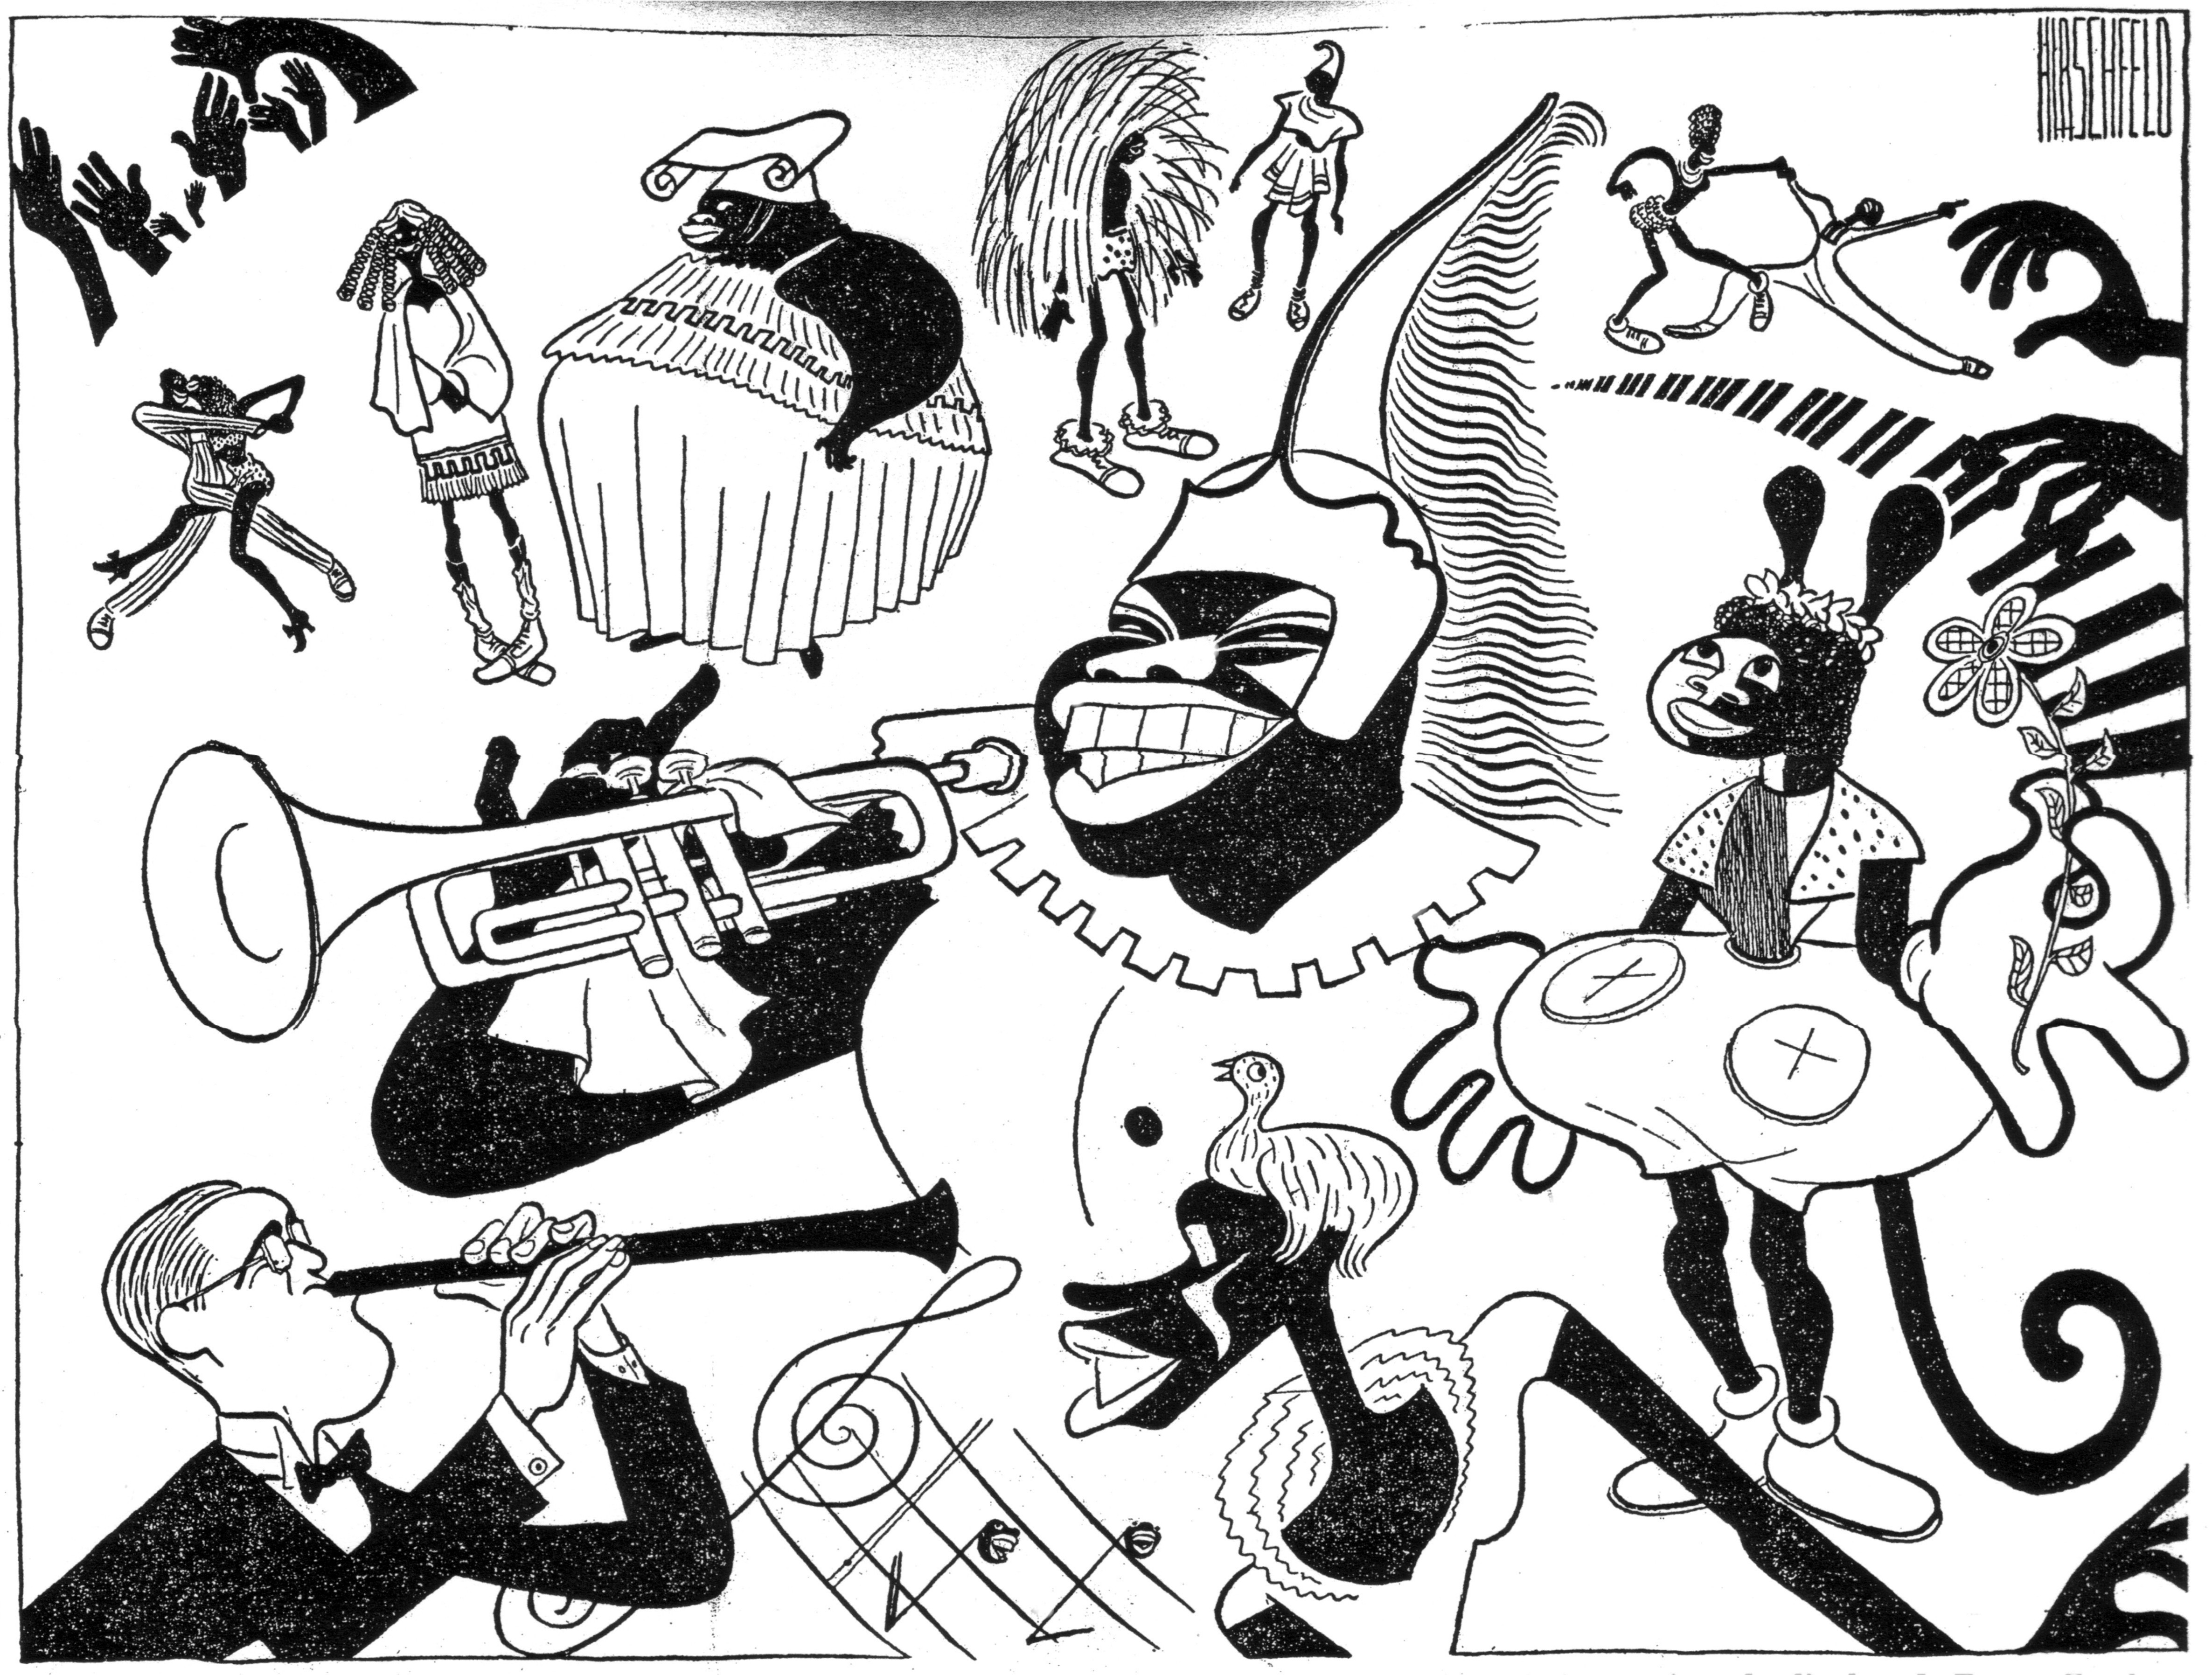 A caricature of "Swinging the Dream" as seen in the New York press.